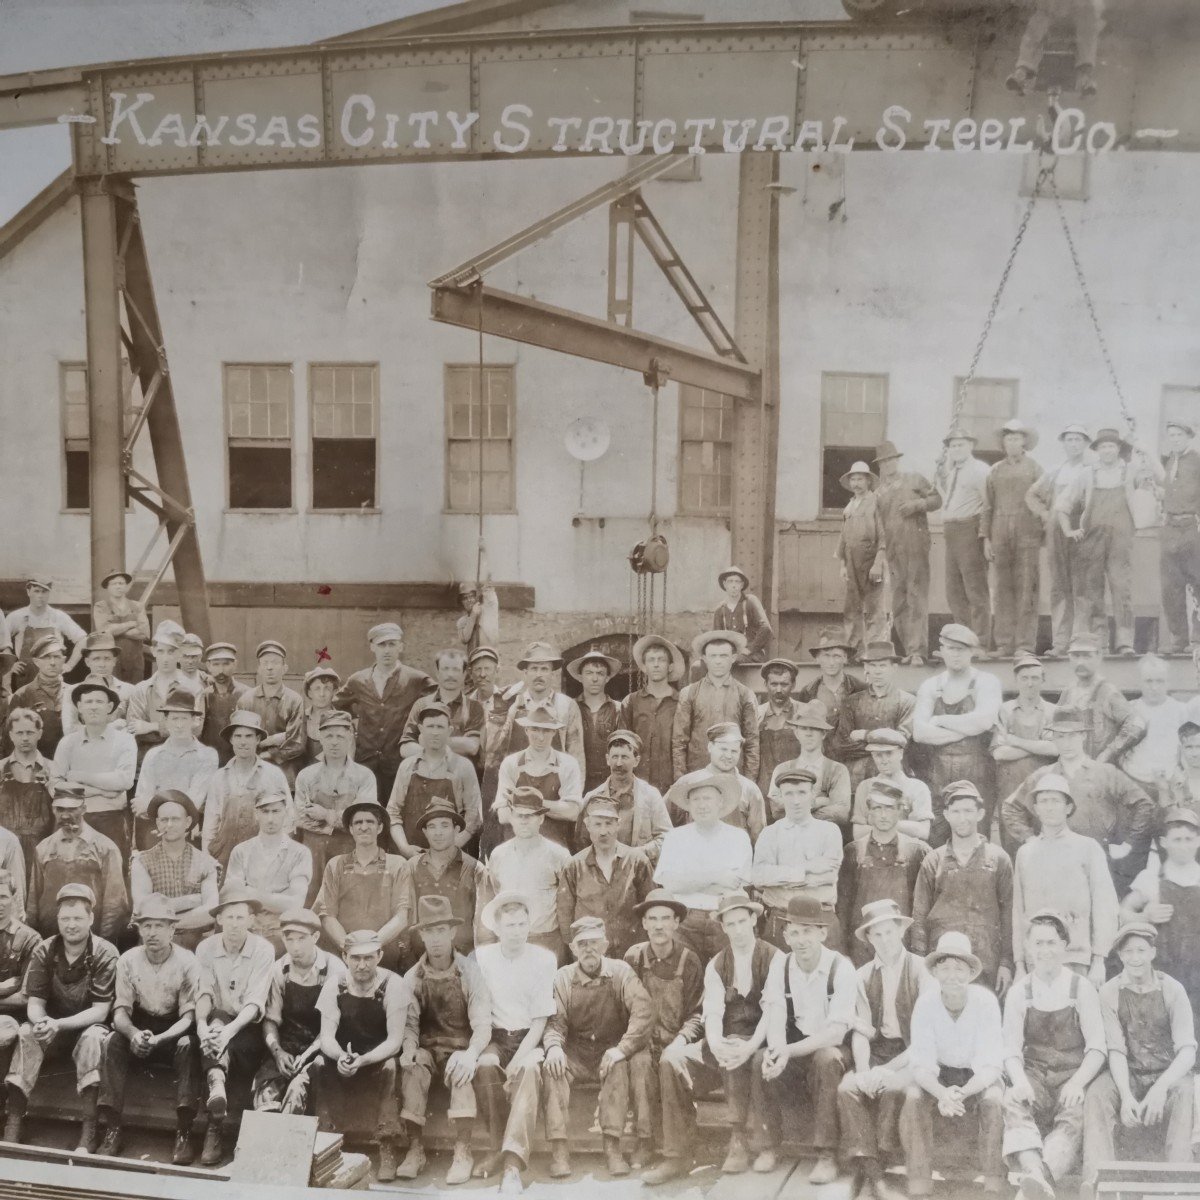 Kansas City Structural Steel Company. Photo From 1914